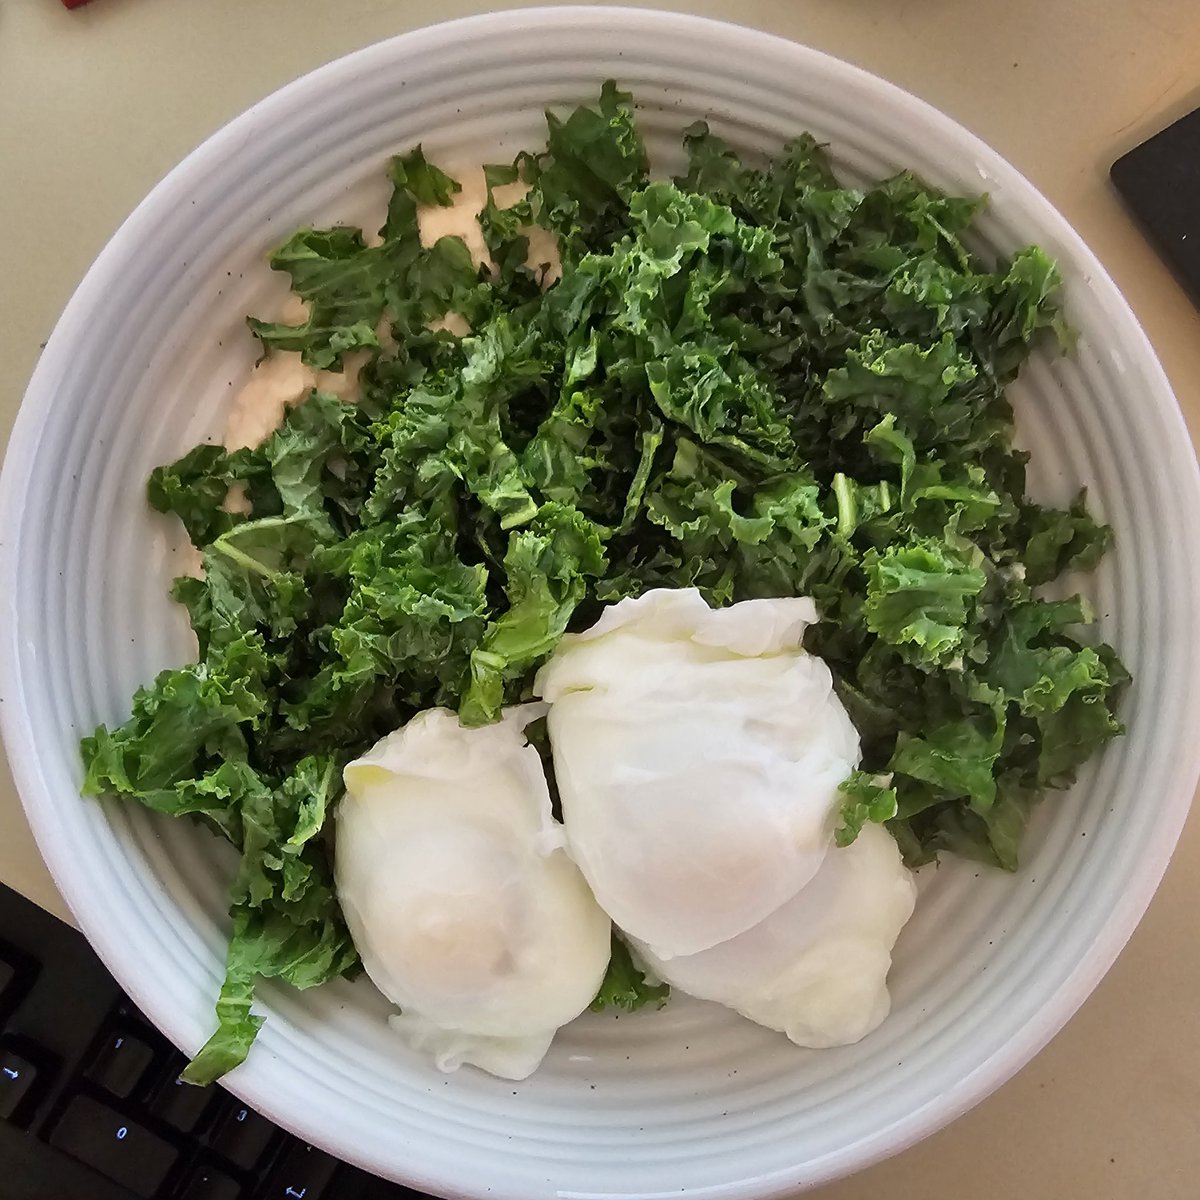 Lunch today is kale, hummus and poached eggs. Its not fancy, but it'll get me through.

#ketoliving
#lchf